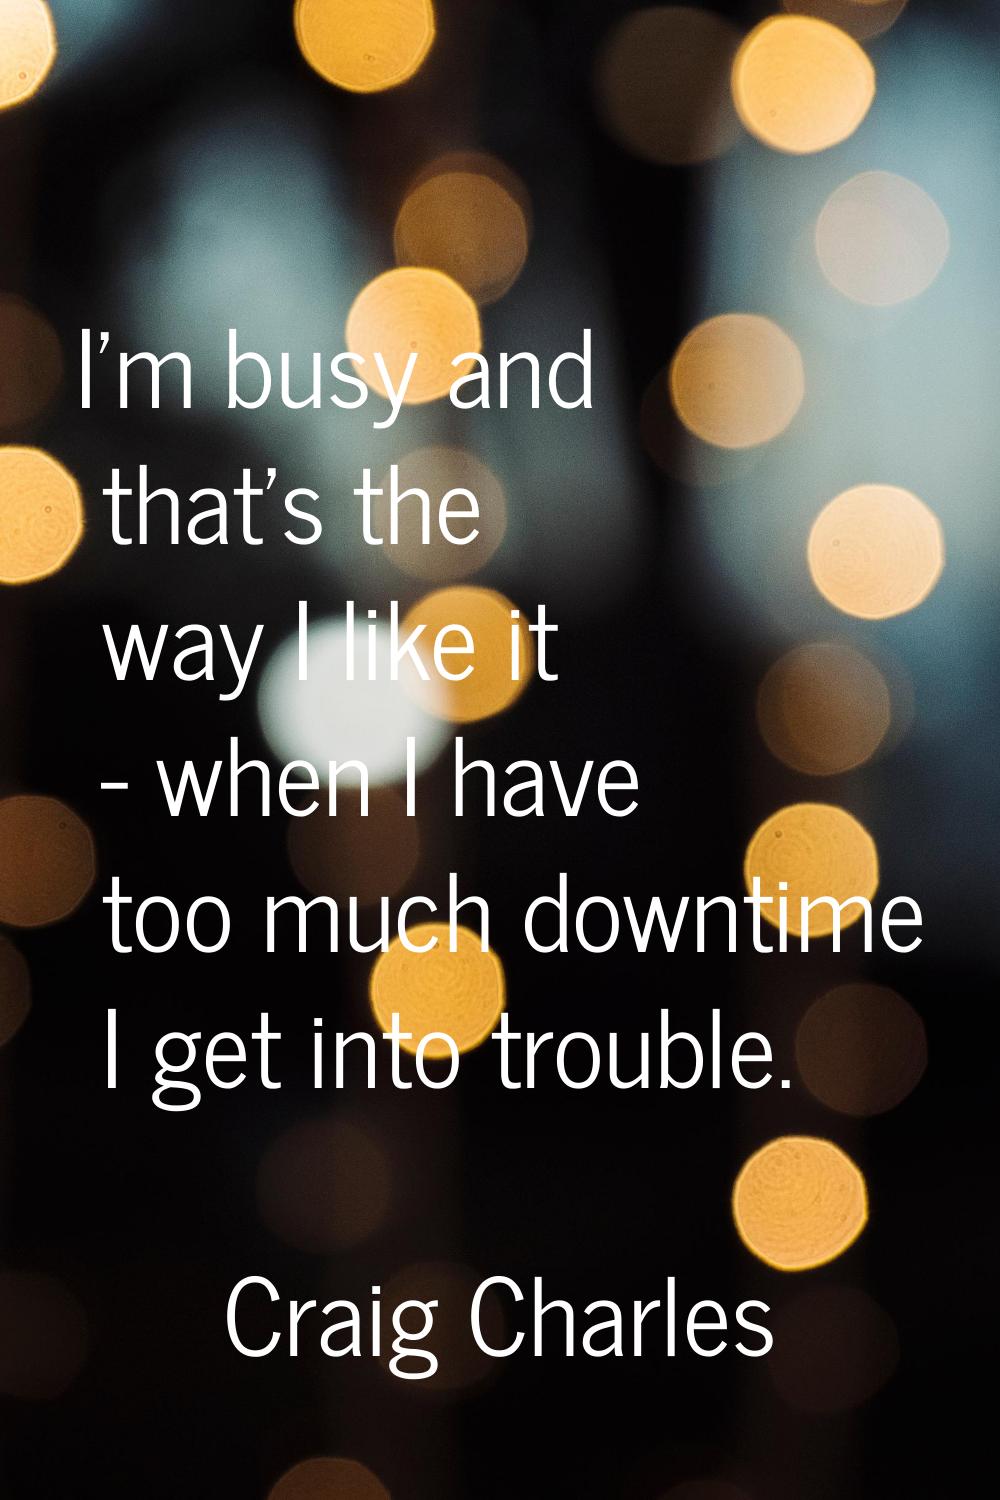 I'm busy and that's the way I like it - when I have too much downtime I get into trouble.